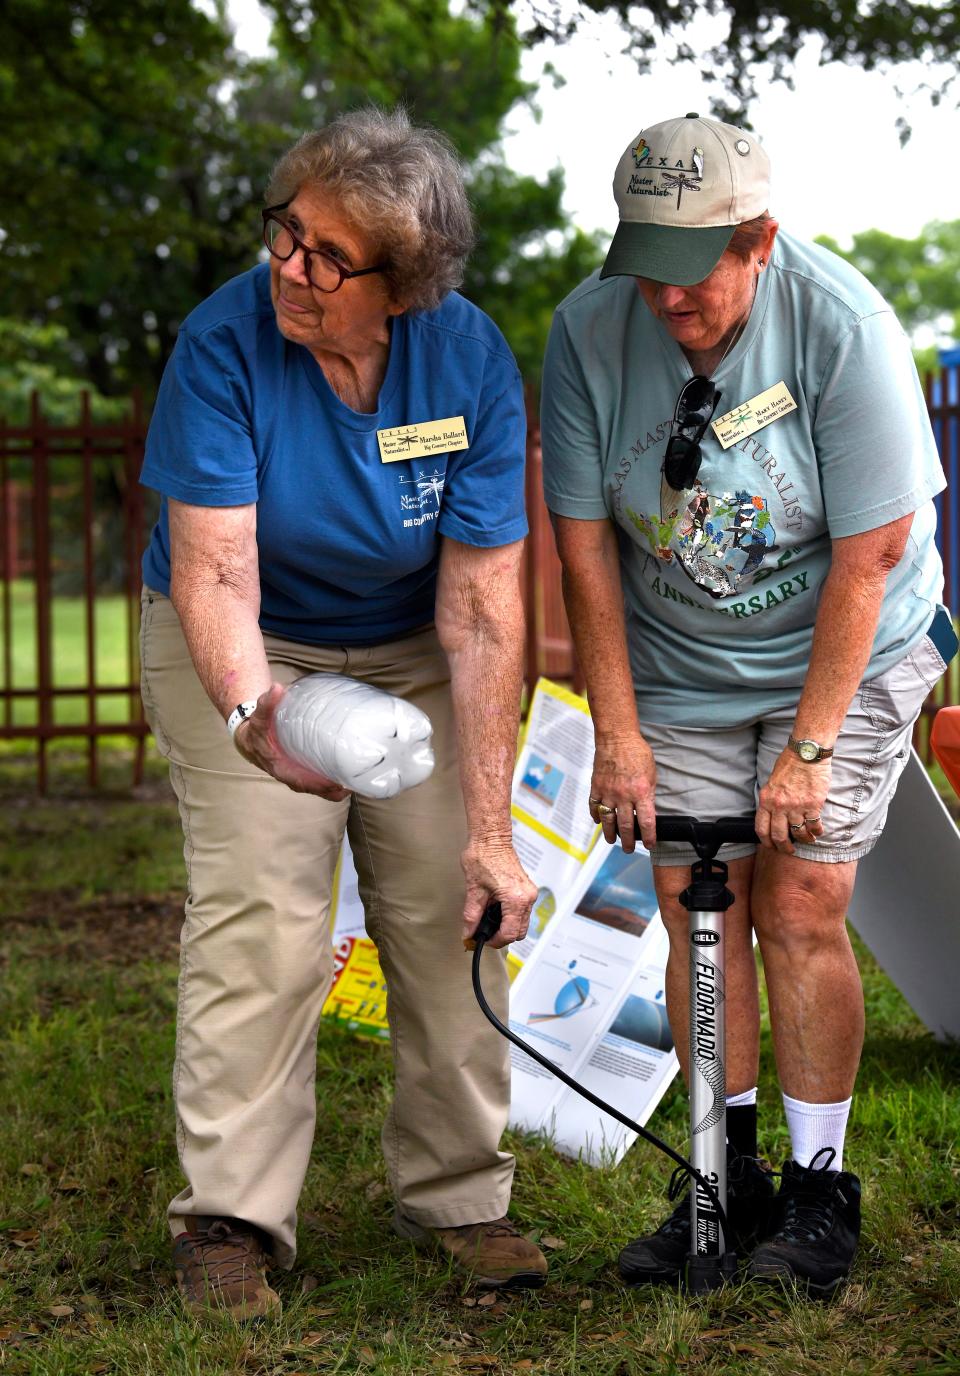 Master naturalists Marsha Ballard (left) and Mary Haney create a cloud inside an otherwise-empty soda bottle at Abilene State Park June 1. The park celebrated its 90th birthday with games and educational activities.